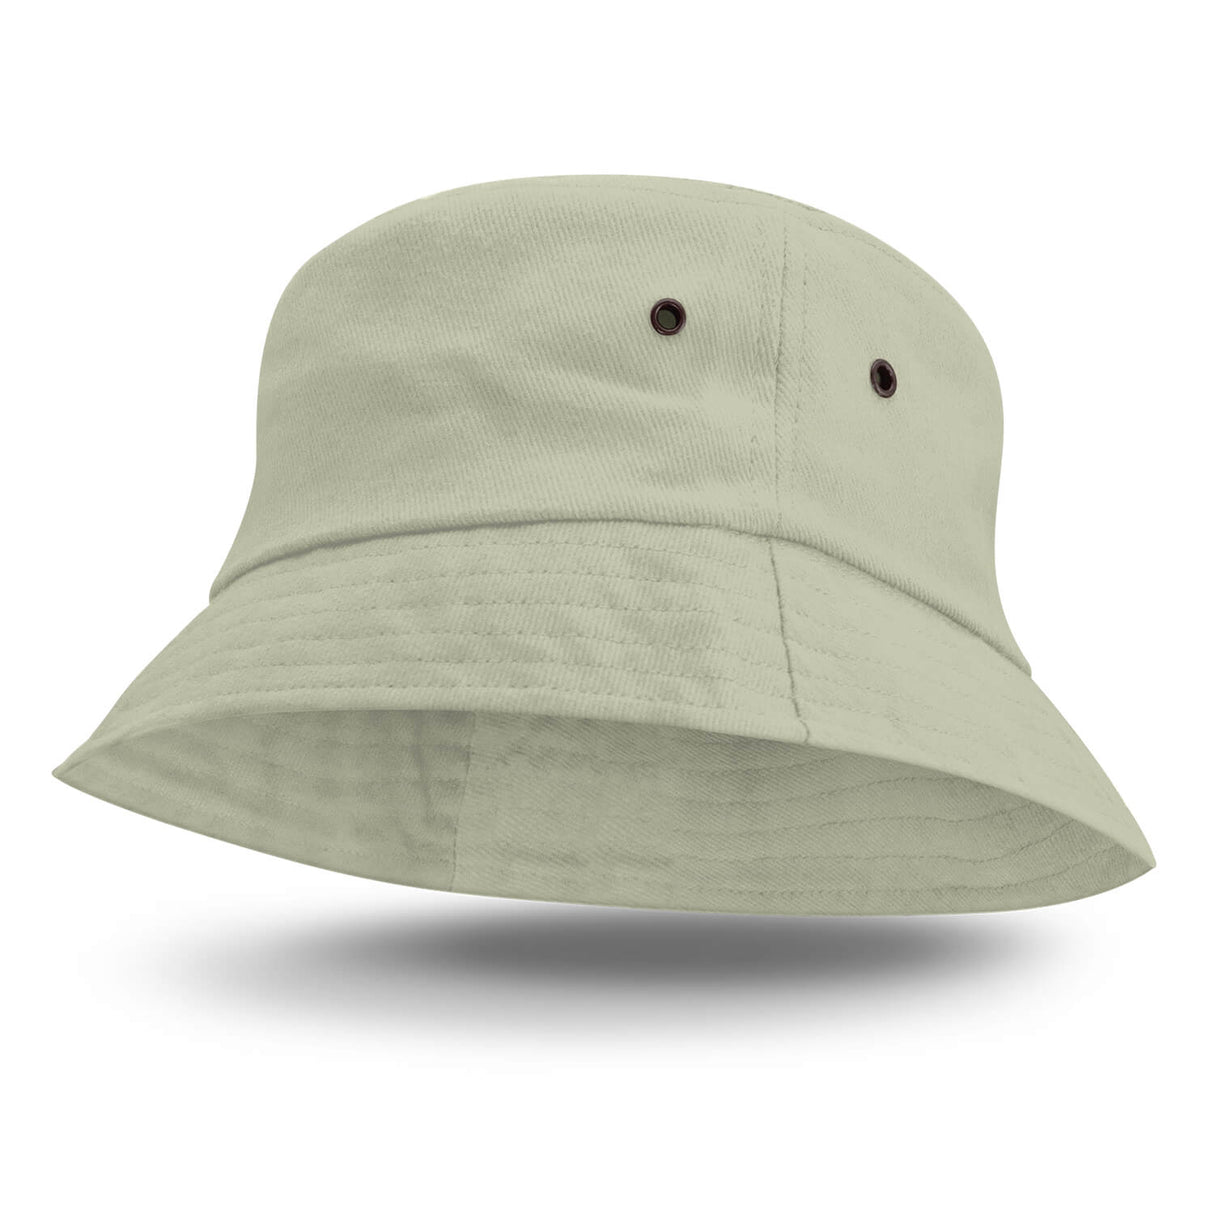 Manly Bucket Hat - Embroidered